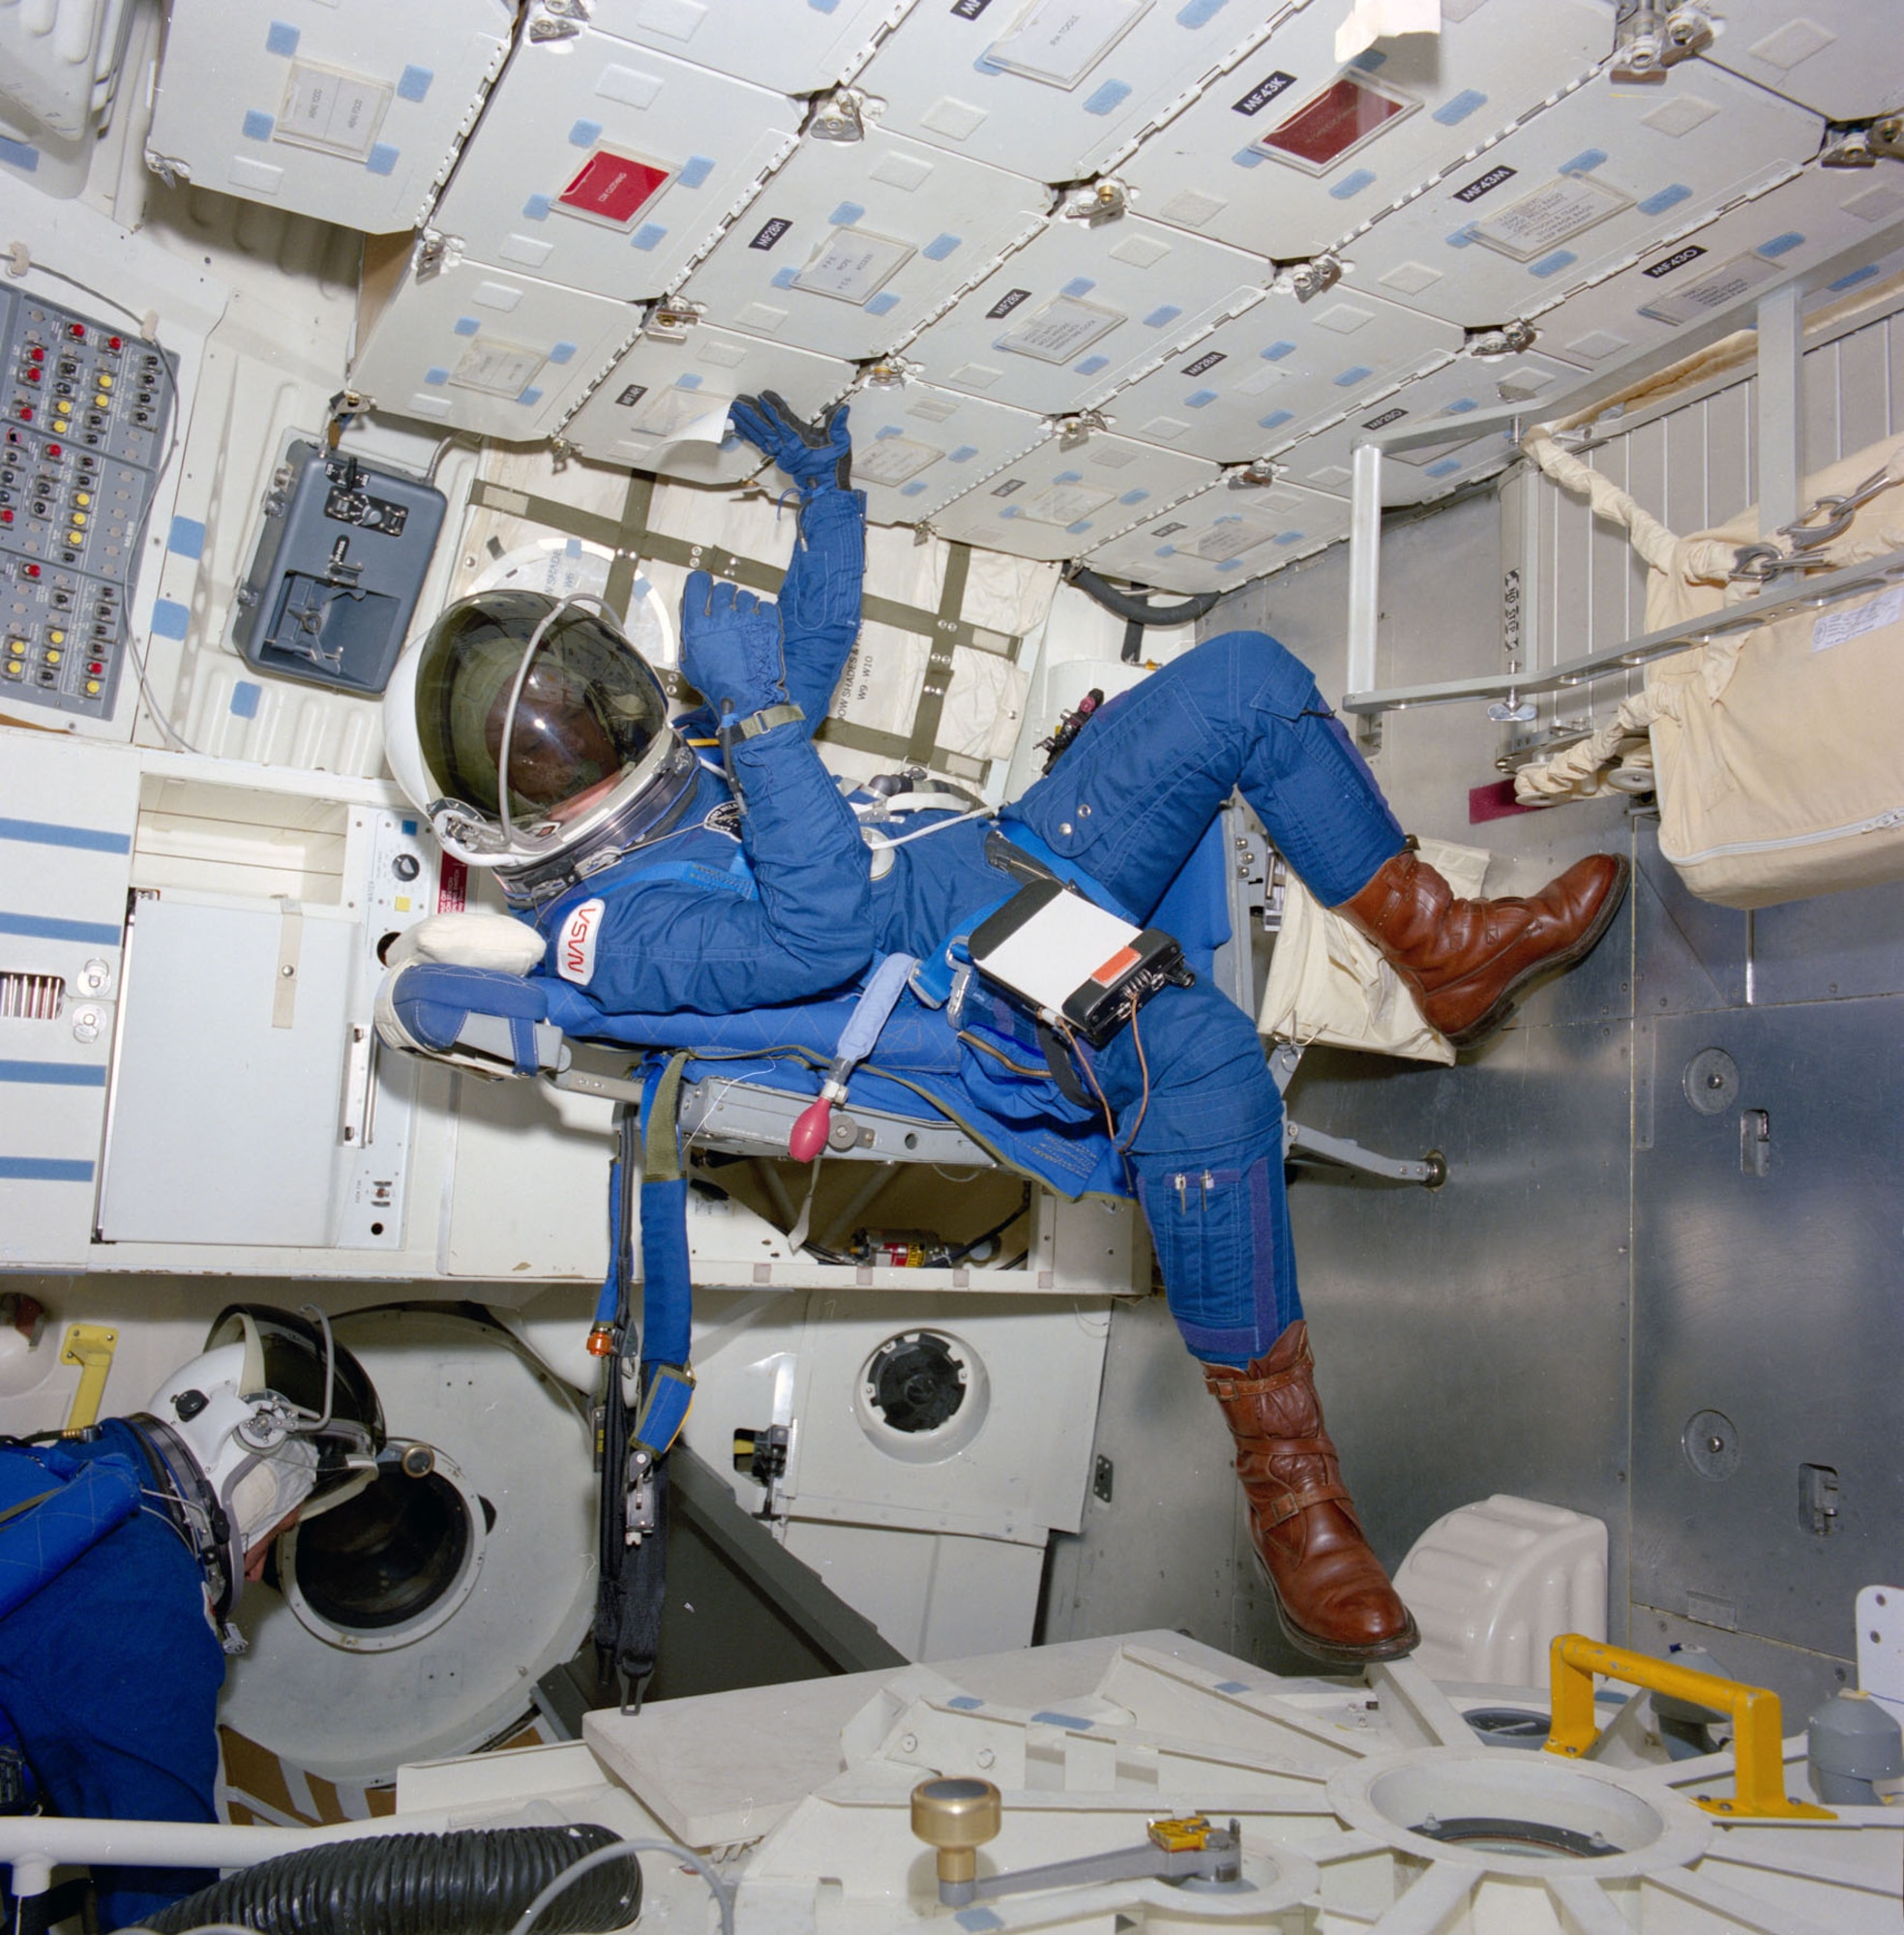 Astronaut George D. Nelson, STS-26 mission specialist, is followed into the mid deck by an unidentified crewmember in the crew compartment trainer (CCT) in the Shuttle Mockup and Integration Laboratory during a March 10, 1988, crew station review. The crew donned new partial pressure suits to evaluate crew equipment and procedures related to emergency egress methods and proposed crew escape options. (NASA photo)